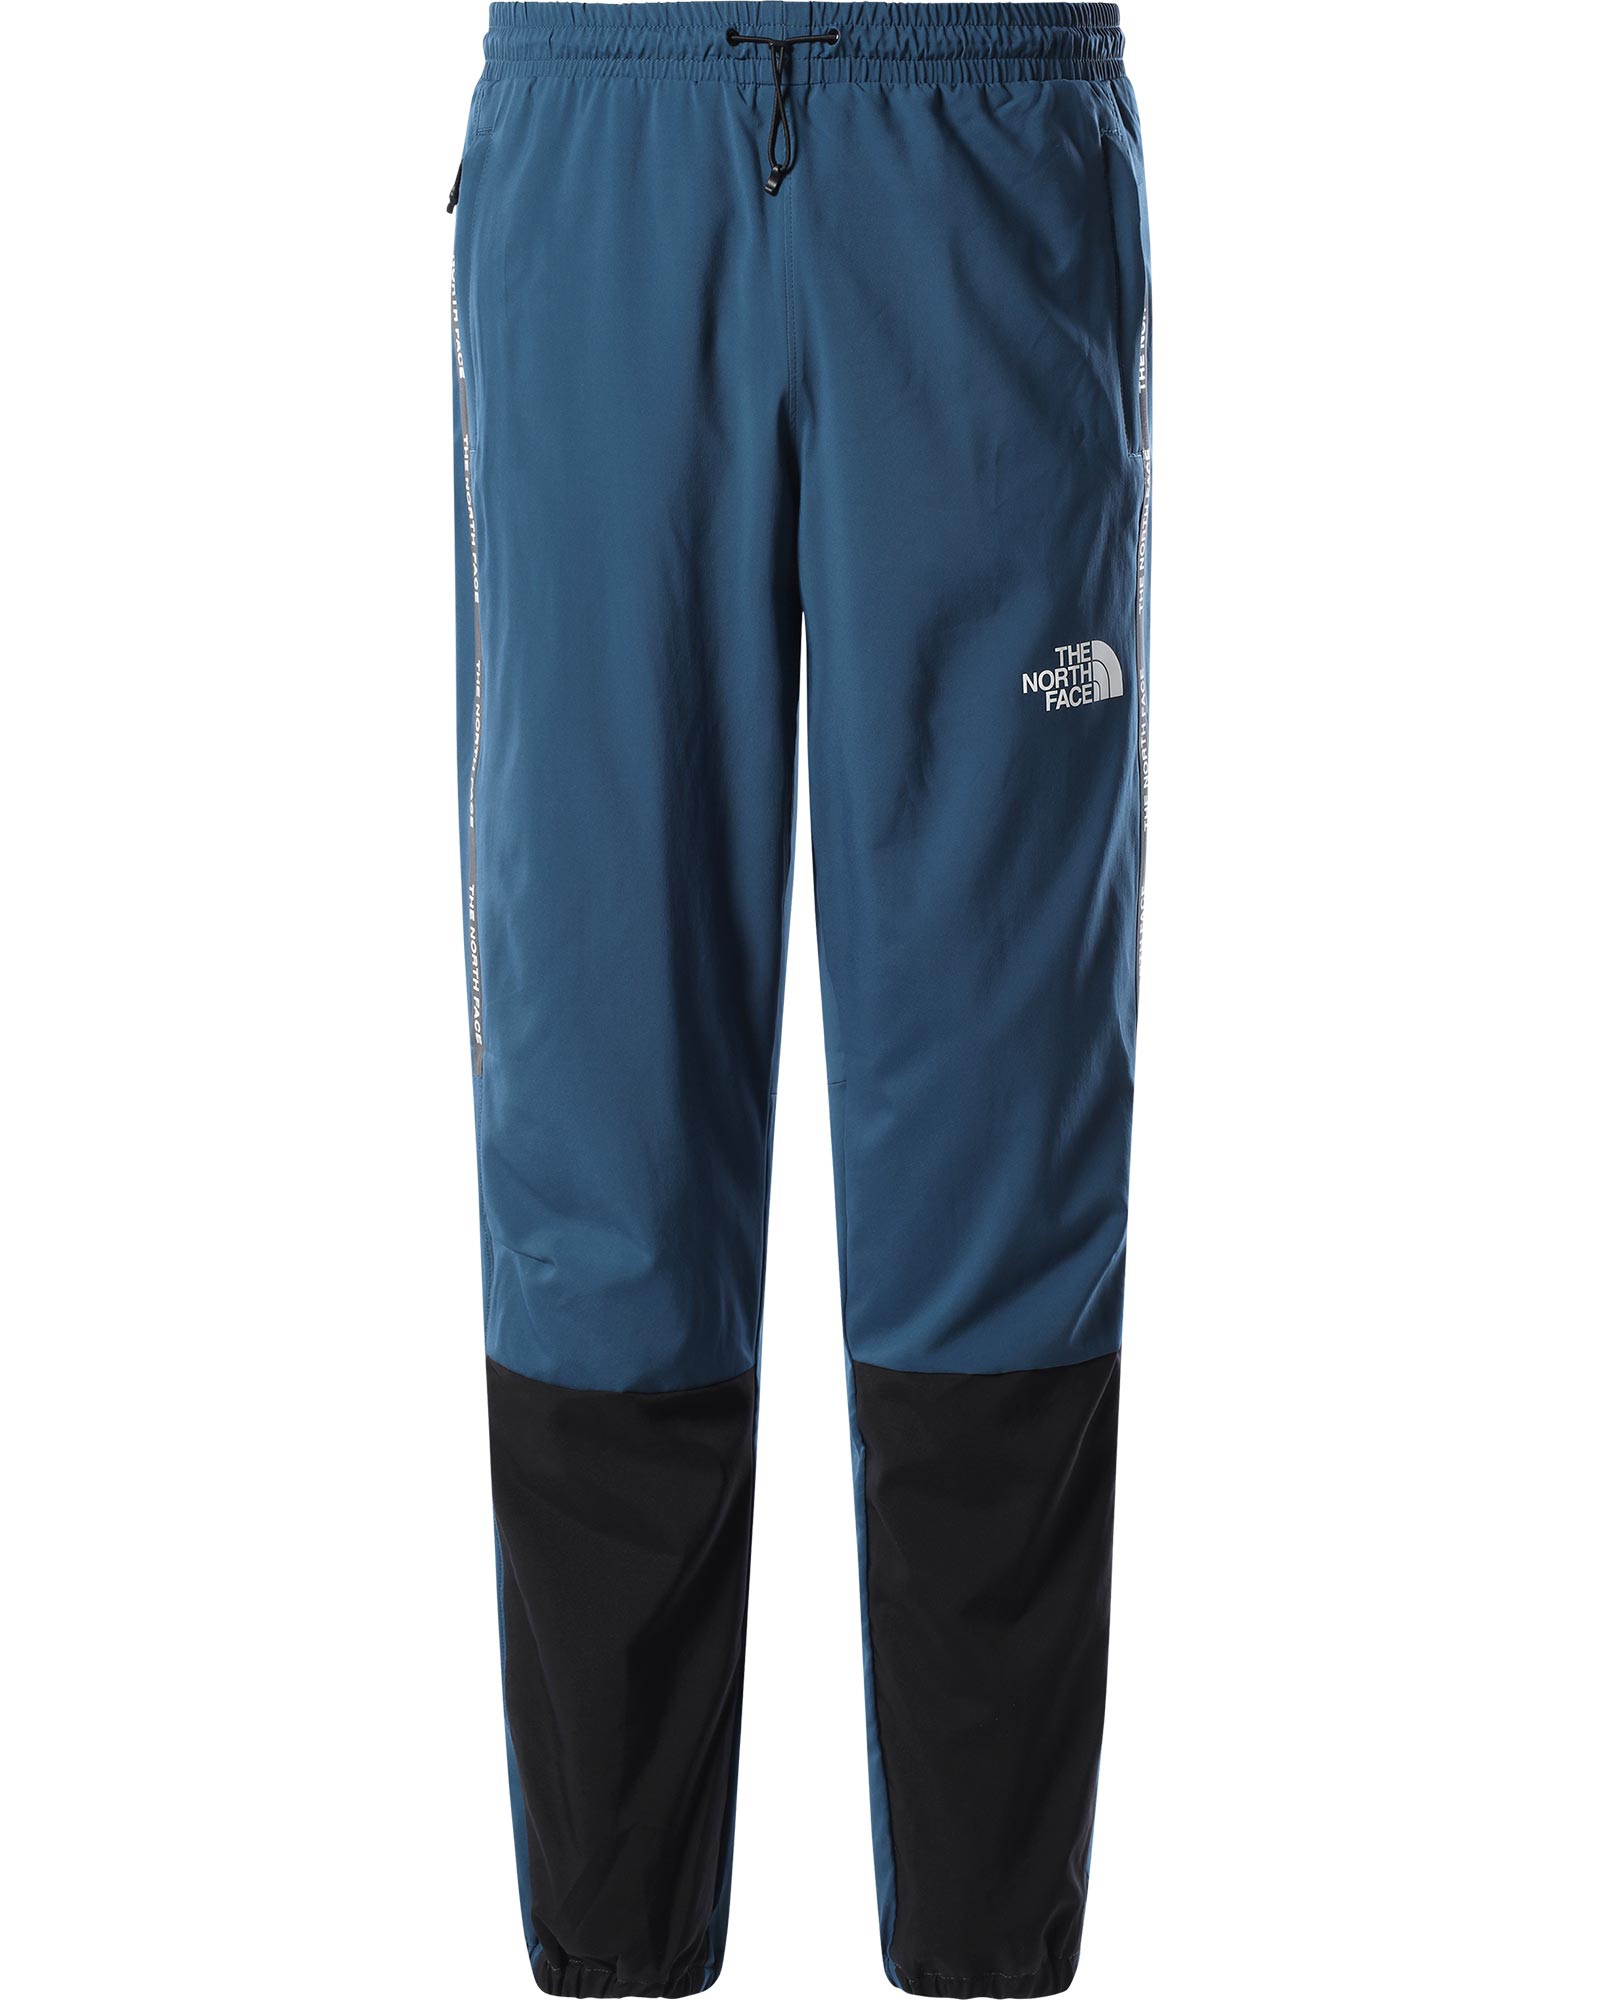 The North Face Ma Mens Woven Pants